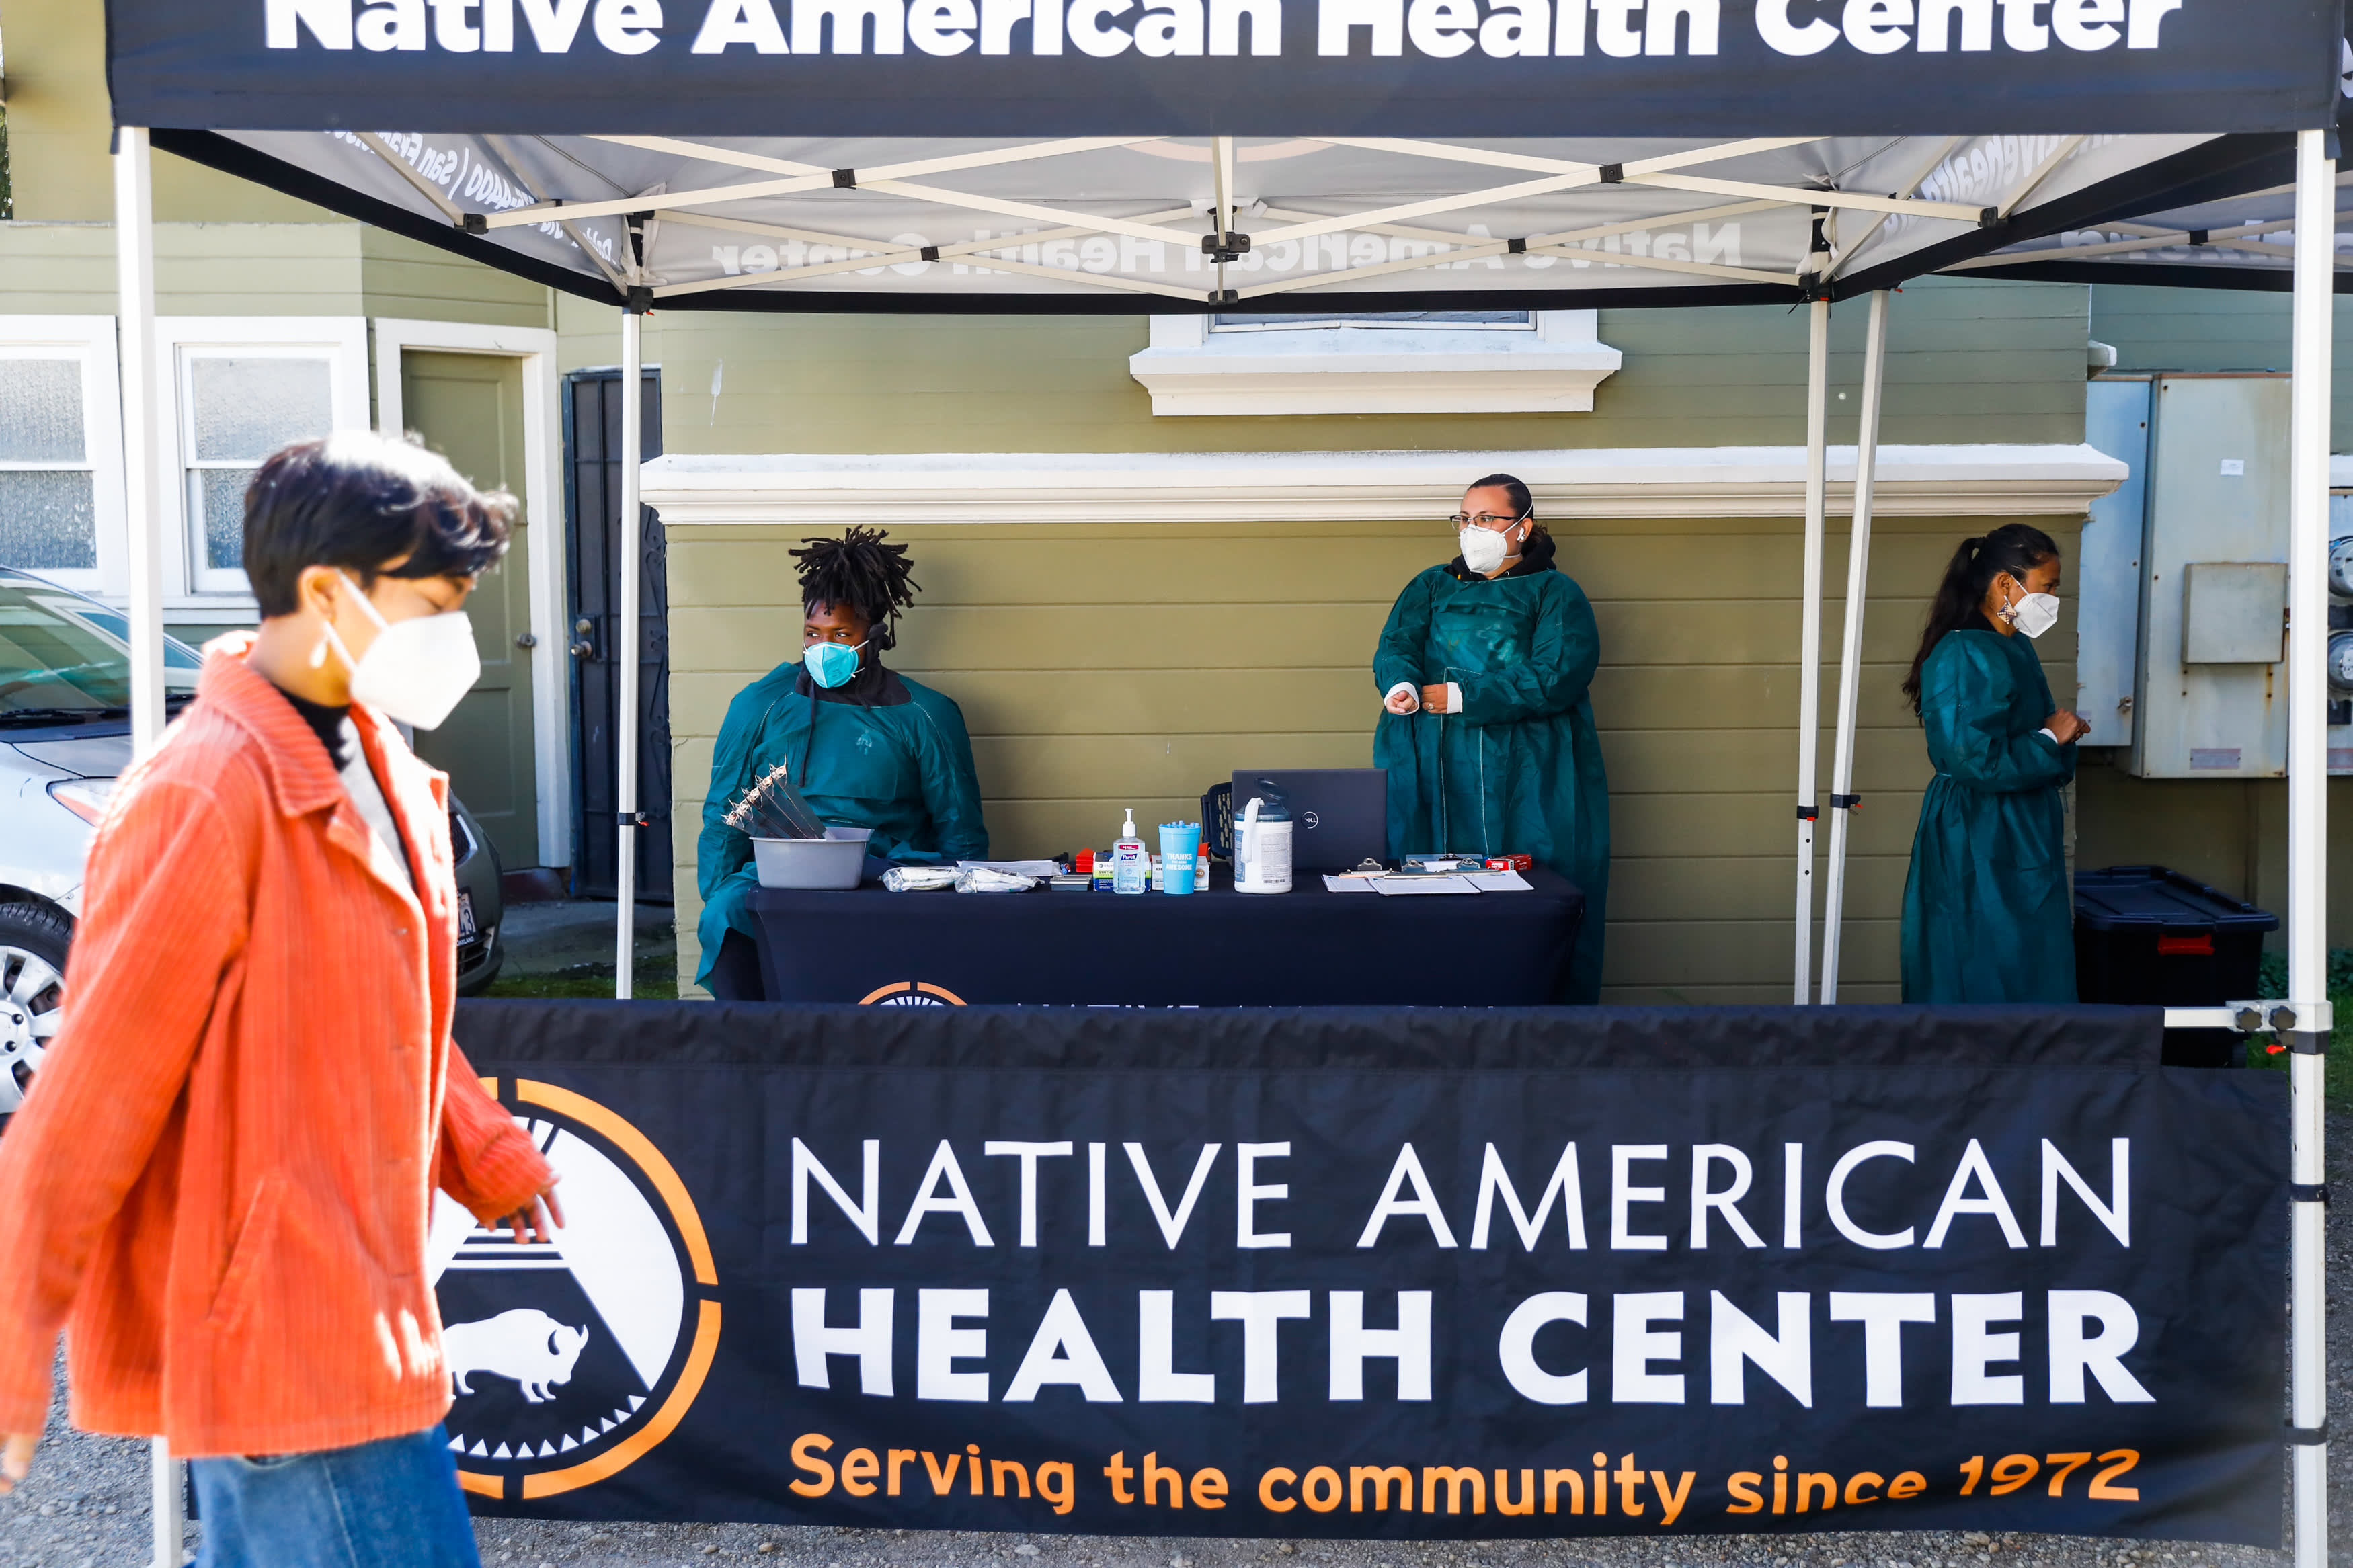 How federally guaranteed health care for Native Americans works in the U.S.